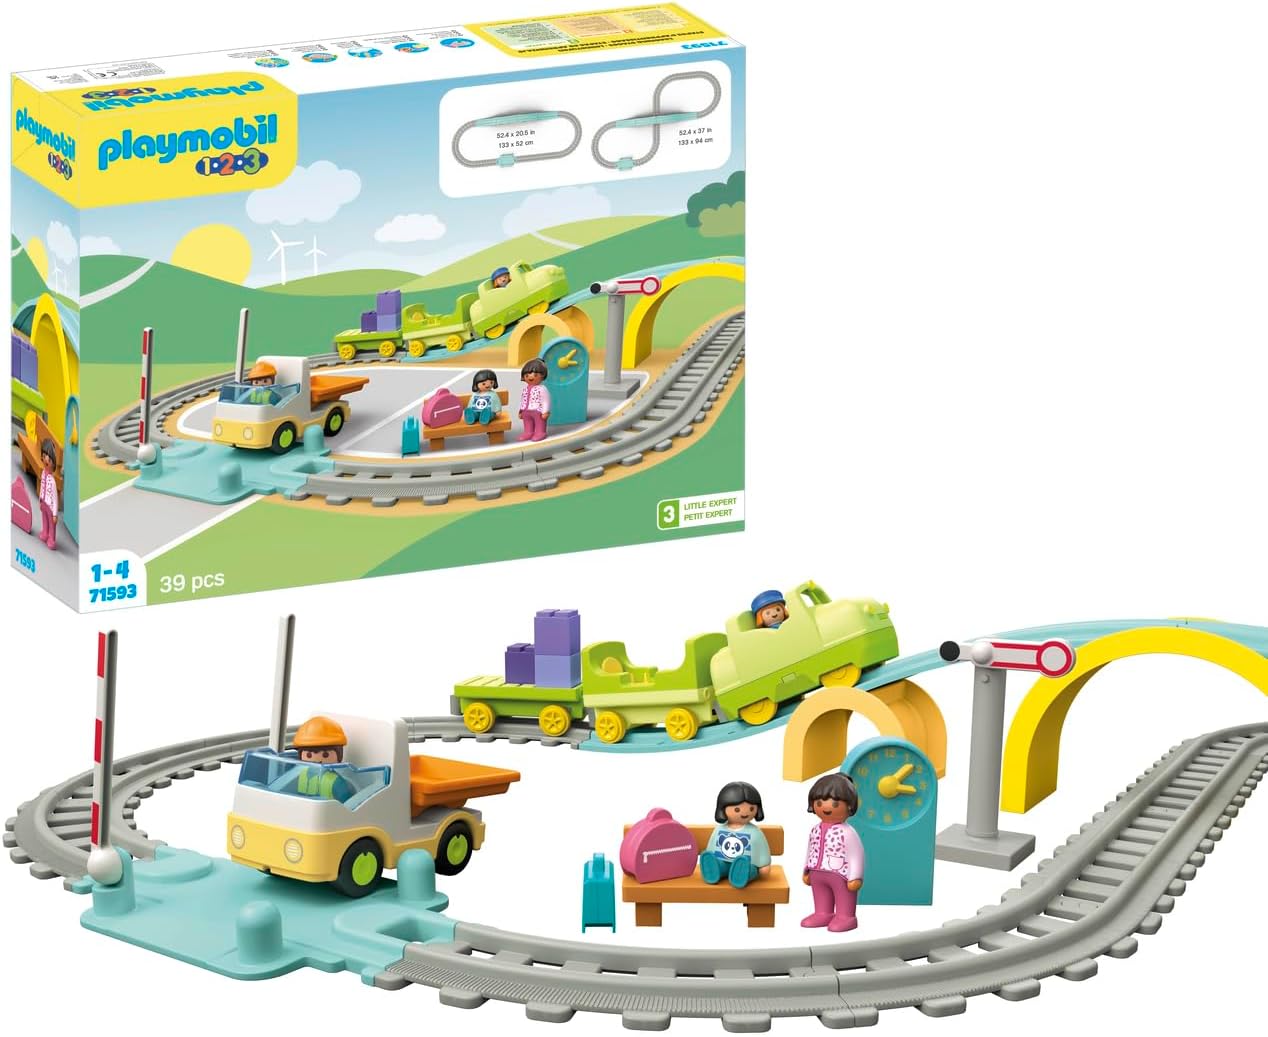 PLAYMOBIL 1.2.3 71593 Large Railway, Versatile Train Set with Wagons, Barriers and Station Clock, Educational Toy for Toddlers, Toy for Children from 12 Months [Exclusive to Amazon]